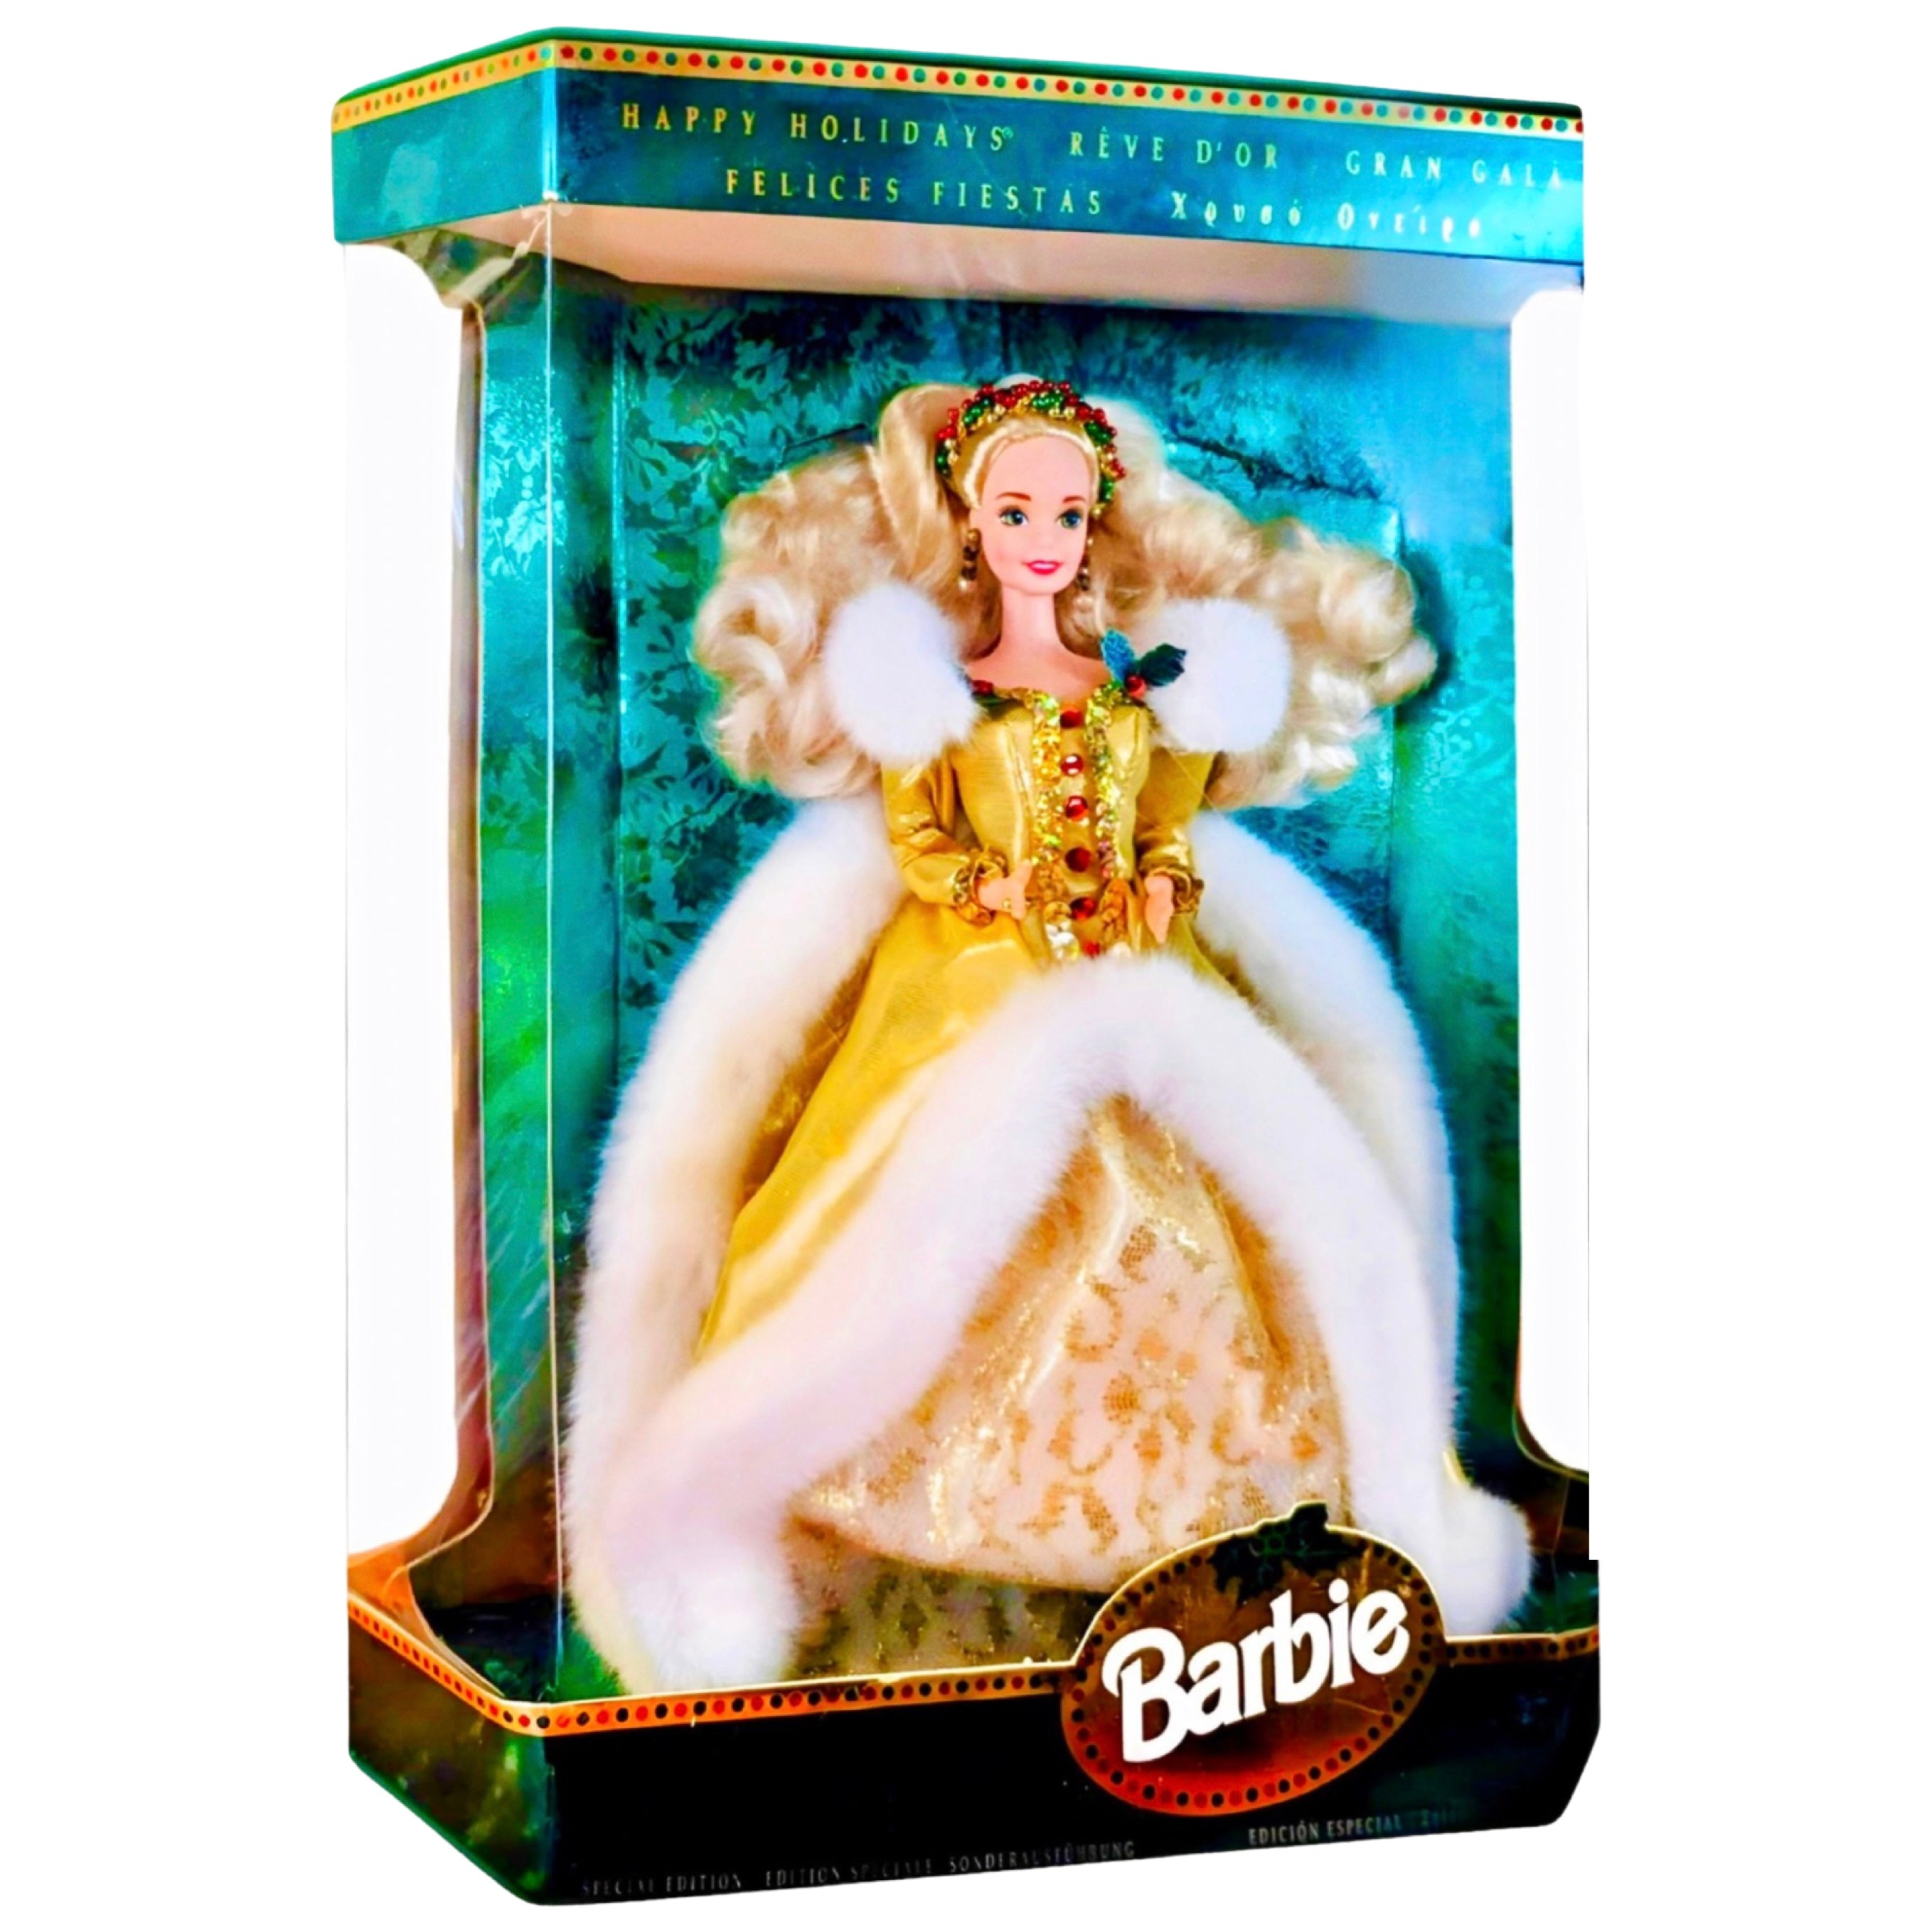 Happy Holidays Special Edition Barbie #12155 | 1994 Mattel - 0